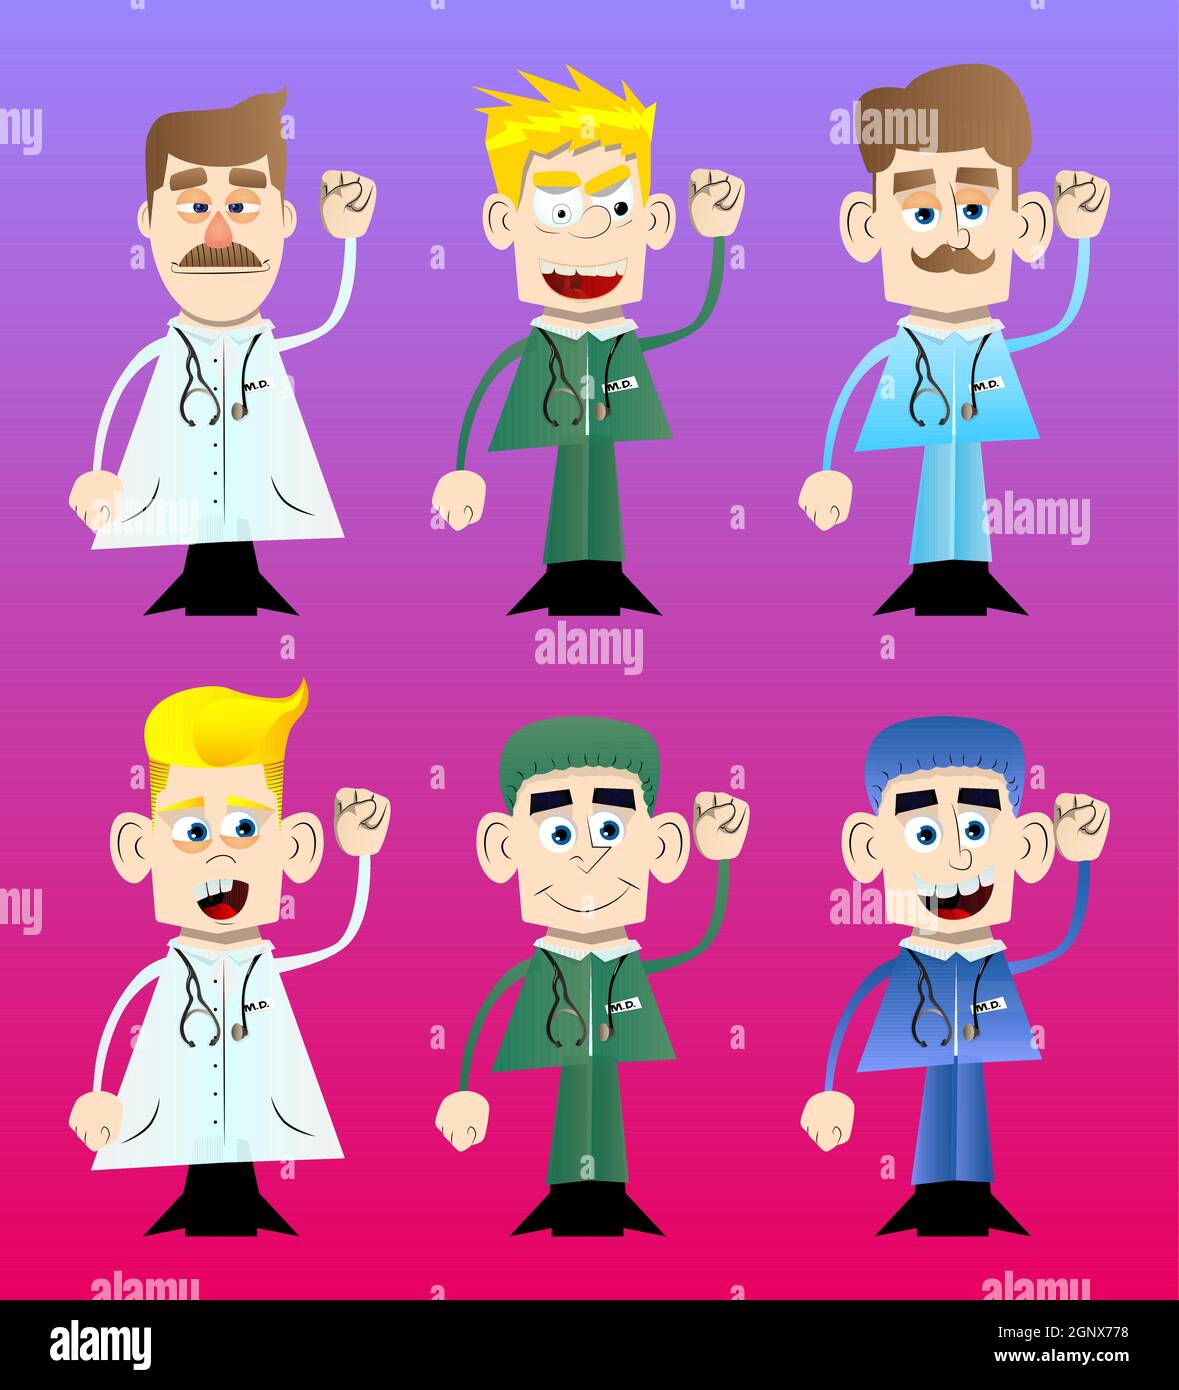 Funny cartoon doctor making power to the people fist gesture. Stock Vector